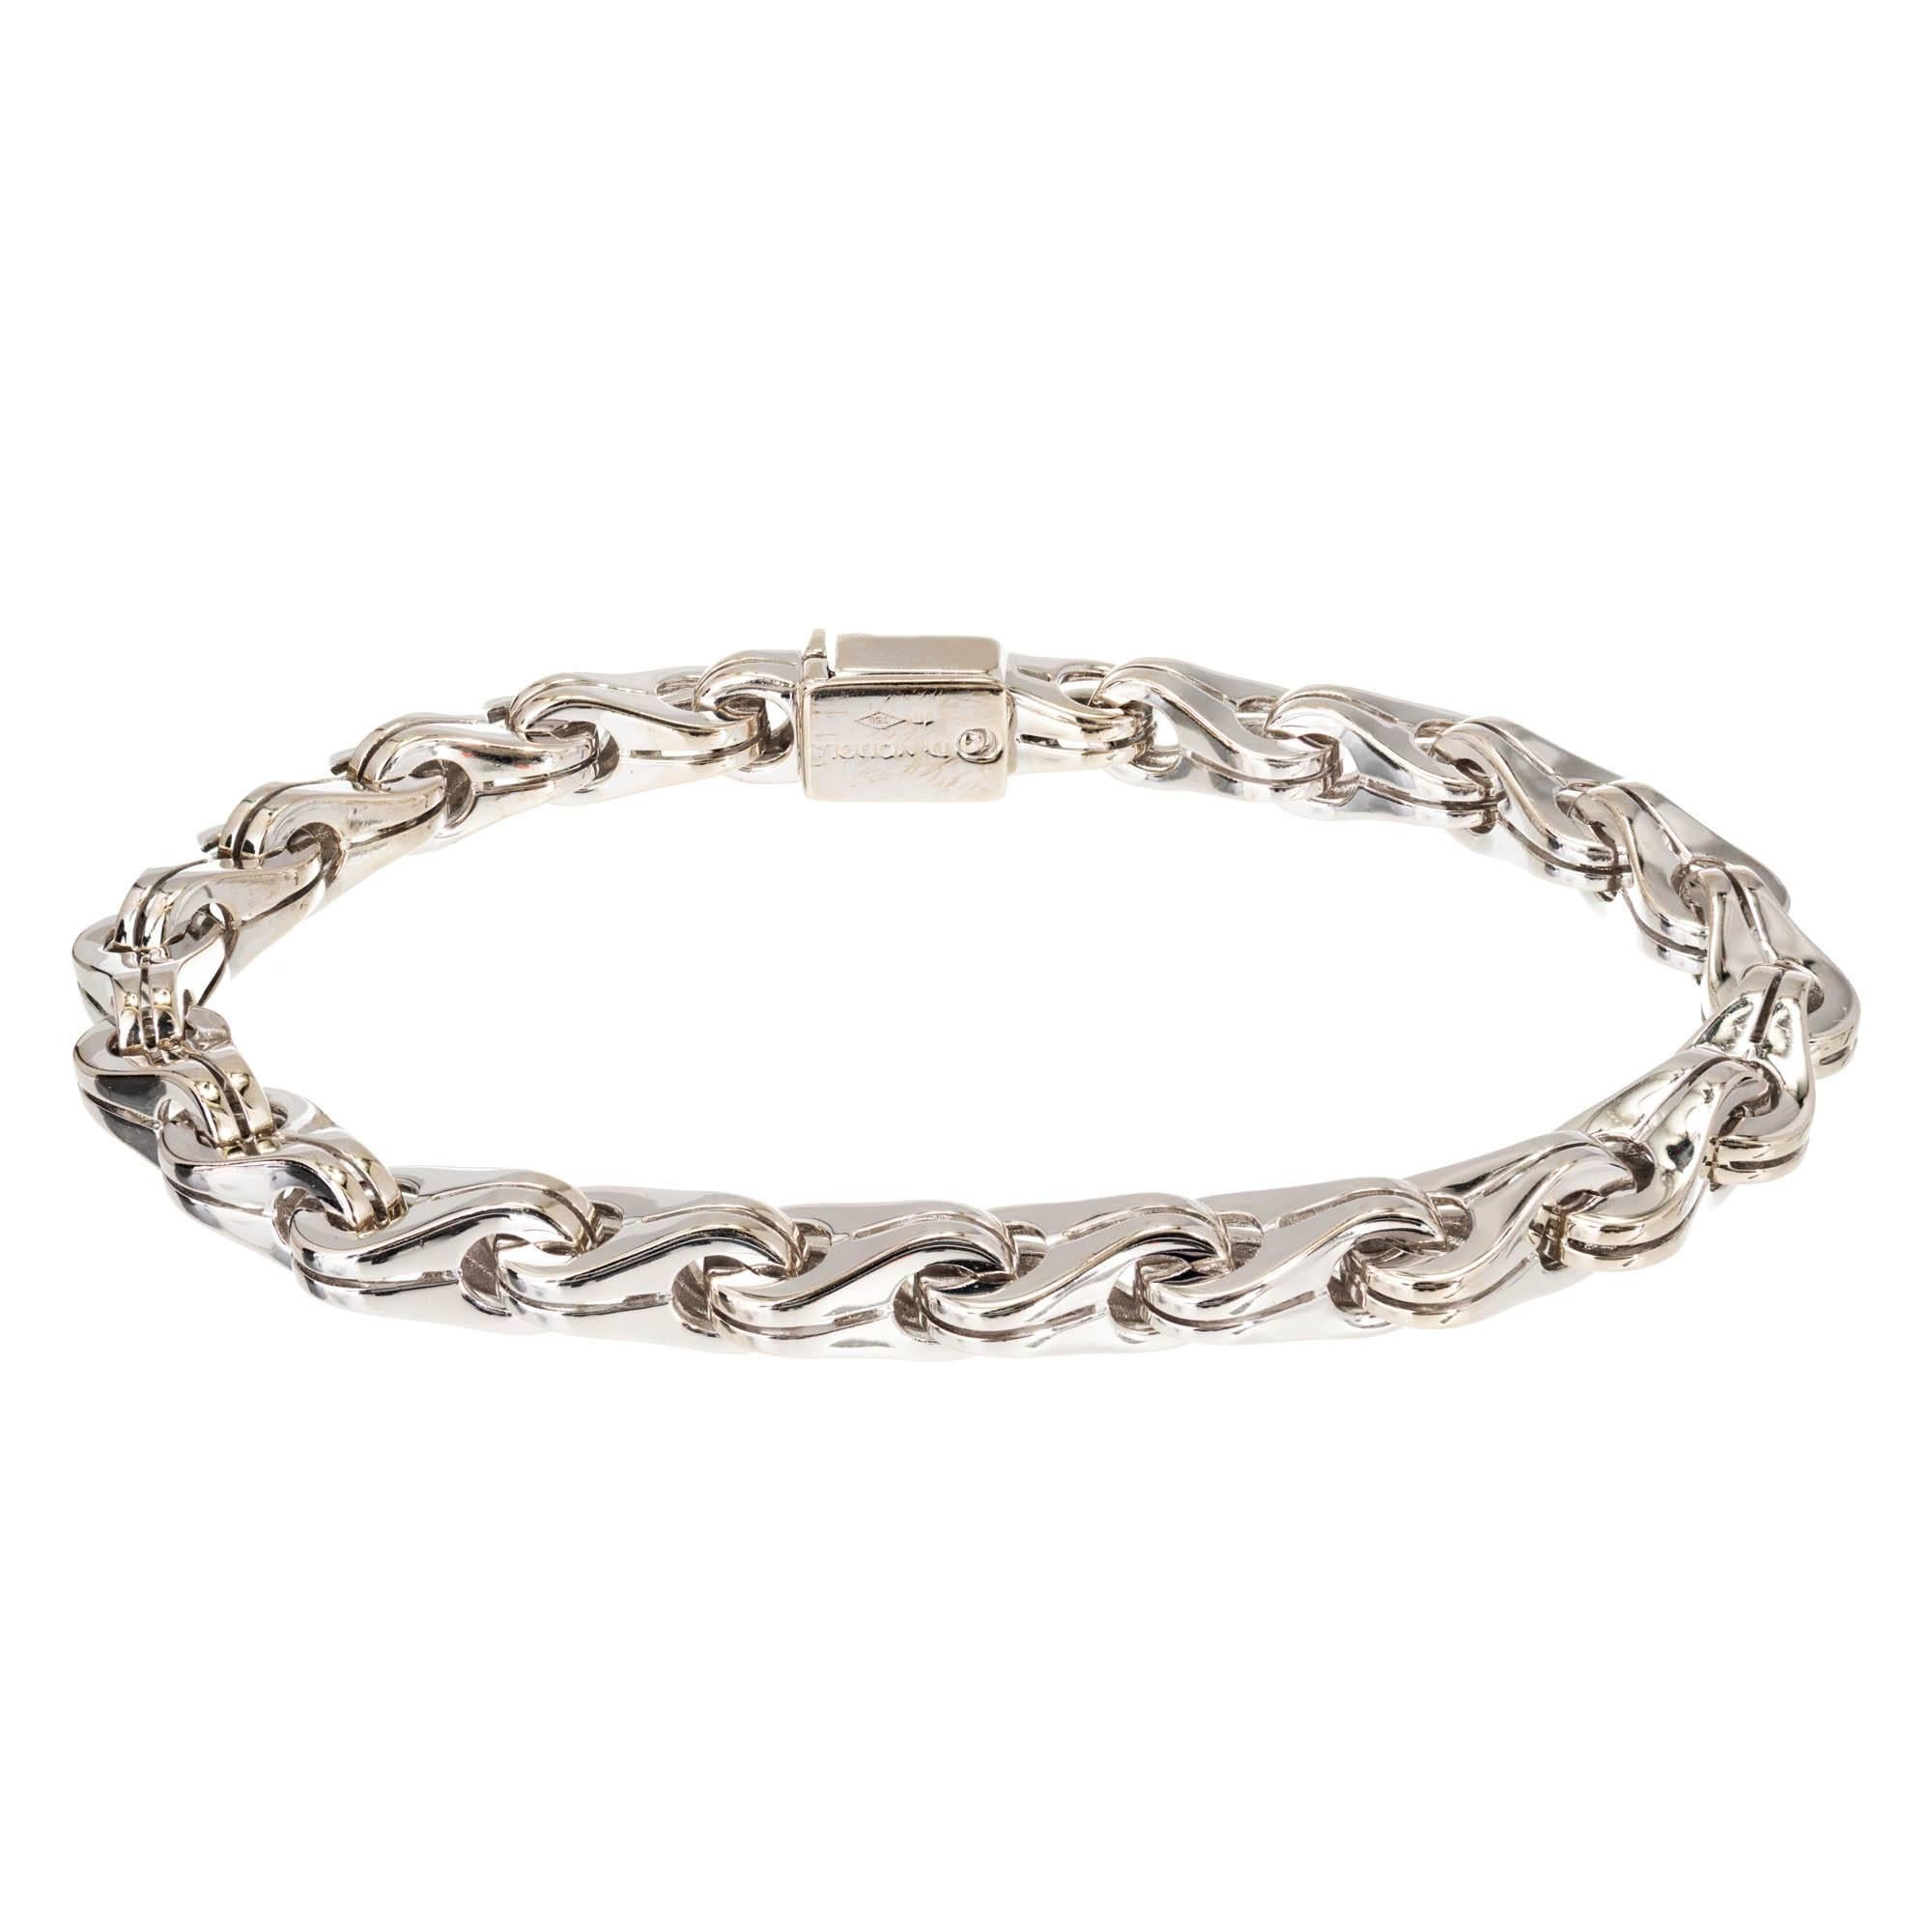 Di Modolo large size heavy weight men's 18k white gold link, 9 Inch bracelet with full cut diamond pave clasp. 

25 round diamonds G VS approximate .30 carats
18k White Gold
Tested: 18k
Stamped: 750
Hallmark: Di Modolo
44.4 Grams
Bracelet/Chain: 9